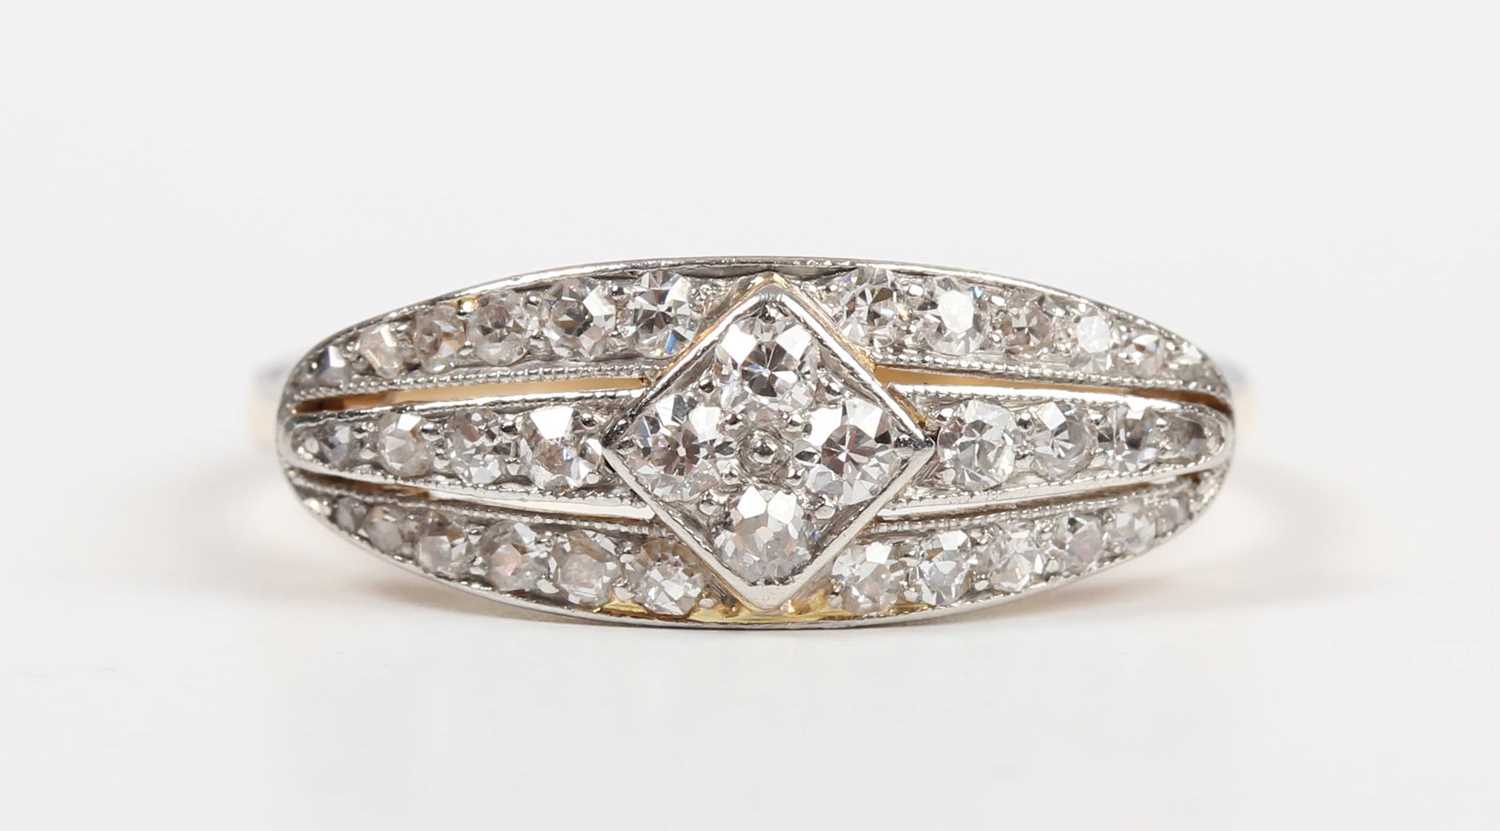 A gold and diamond ring in an oval panel shaped design, mounted with circular cut diamonds, - Image 2 of 5